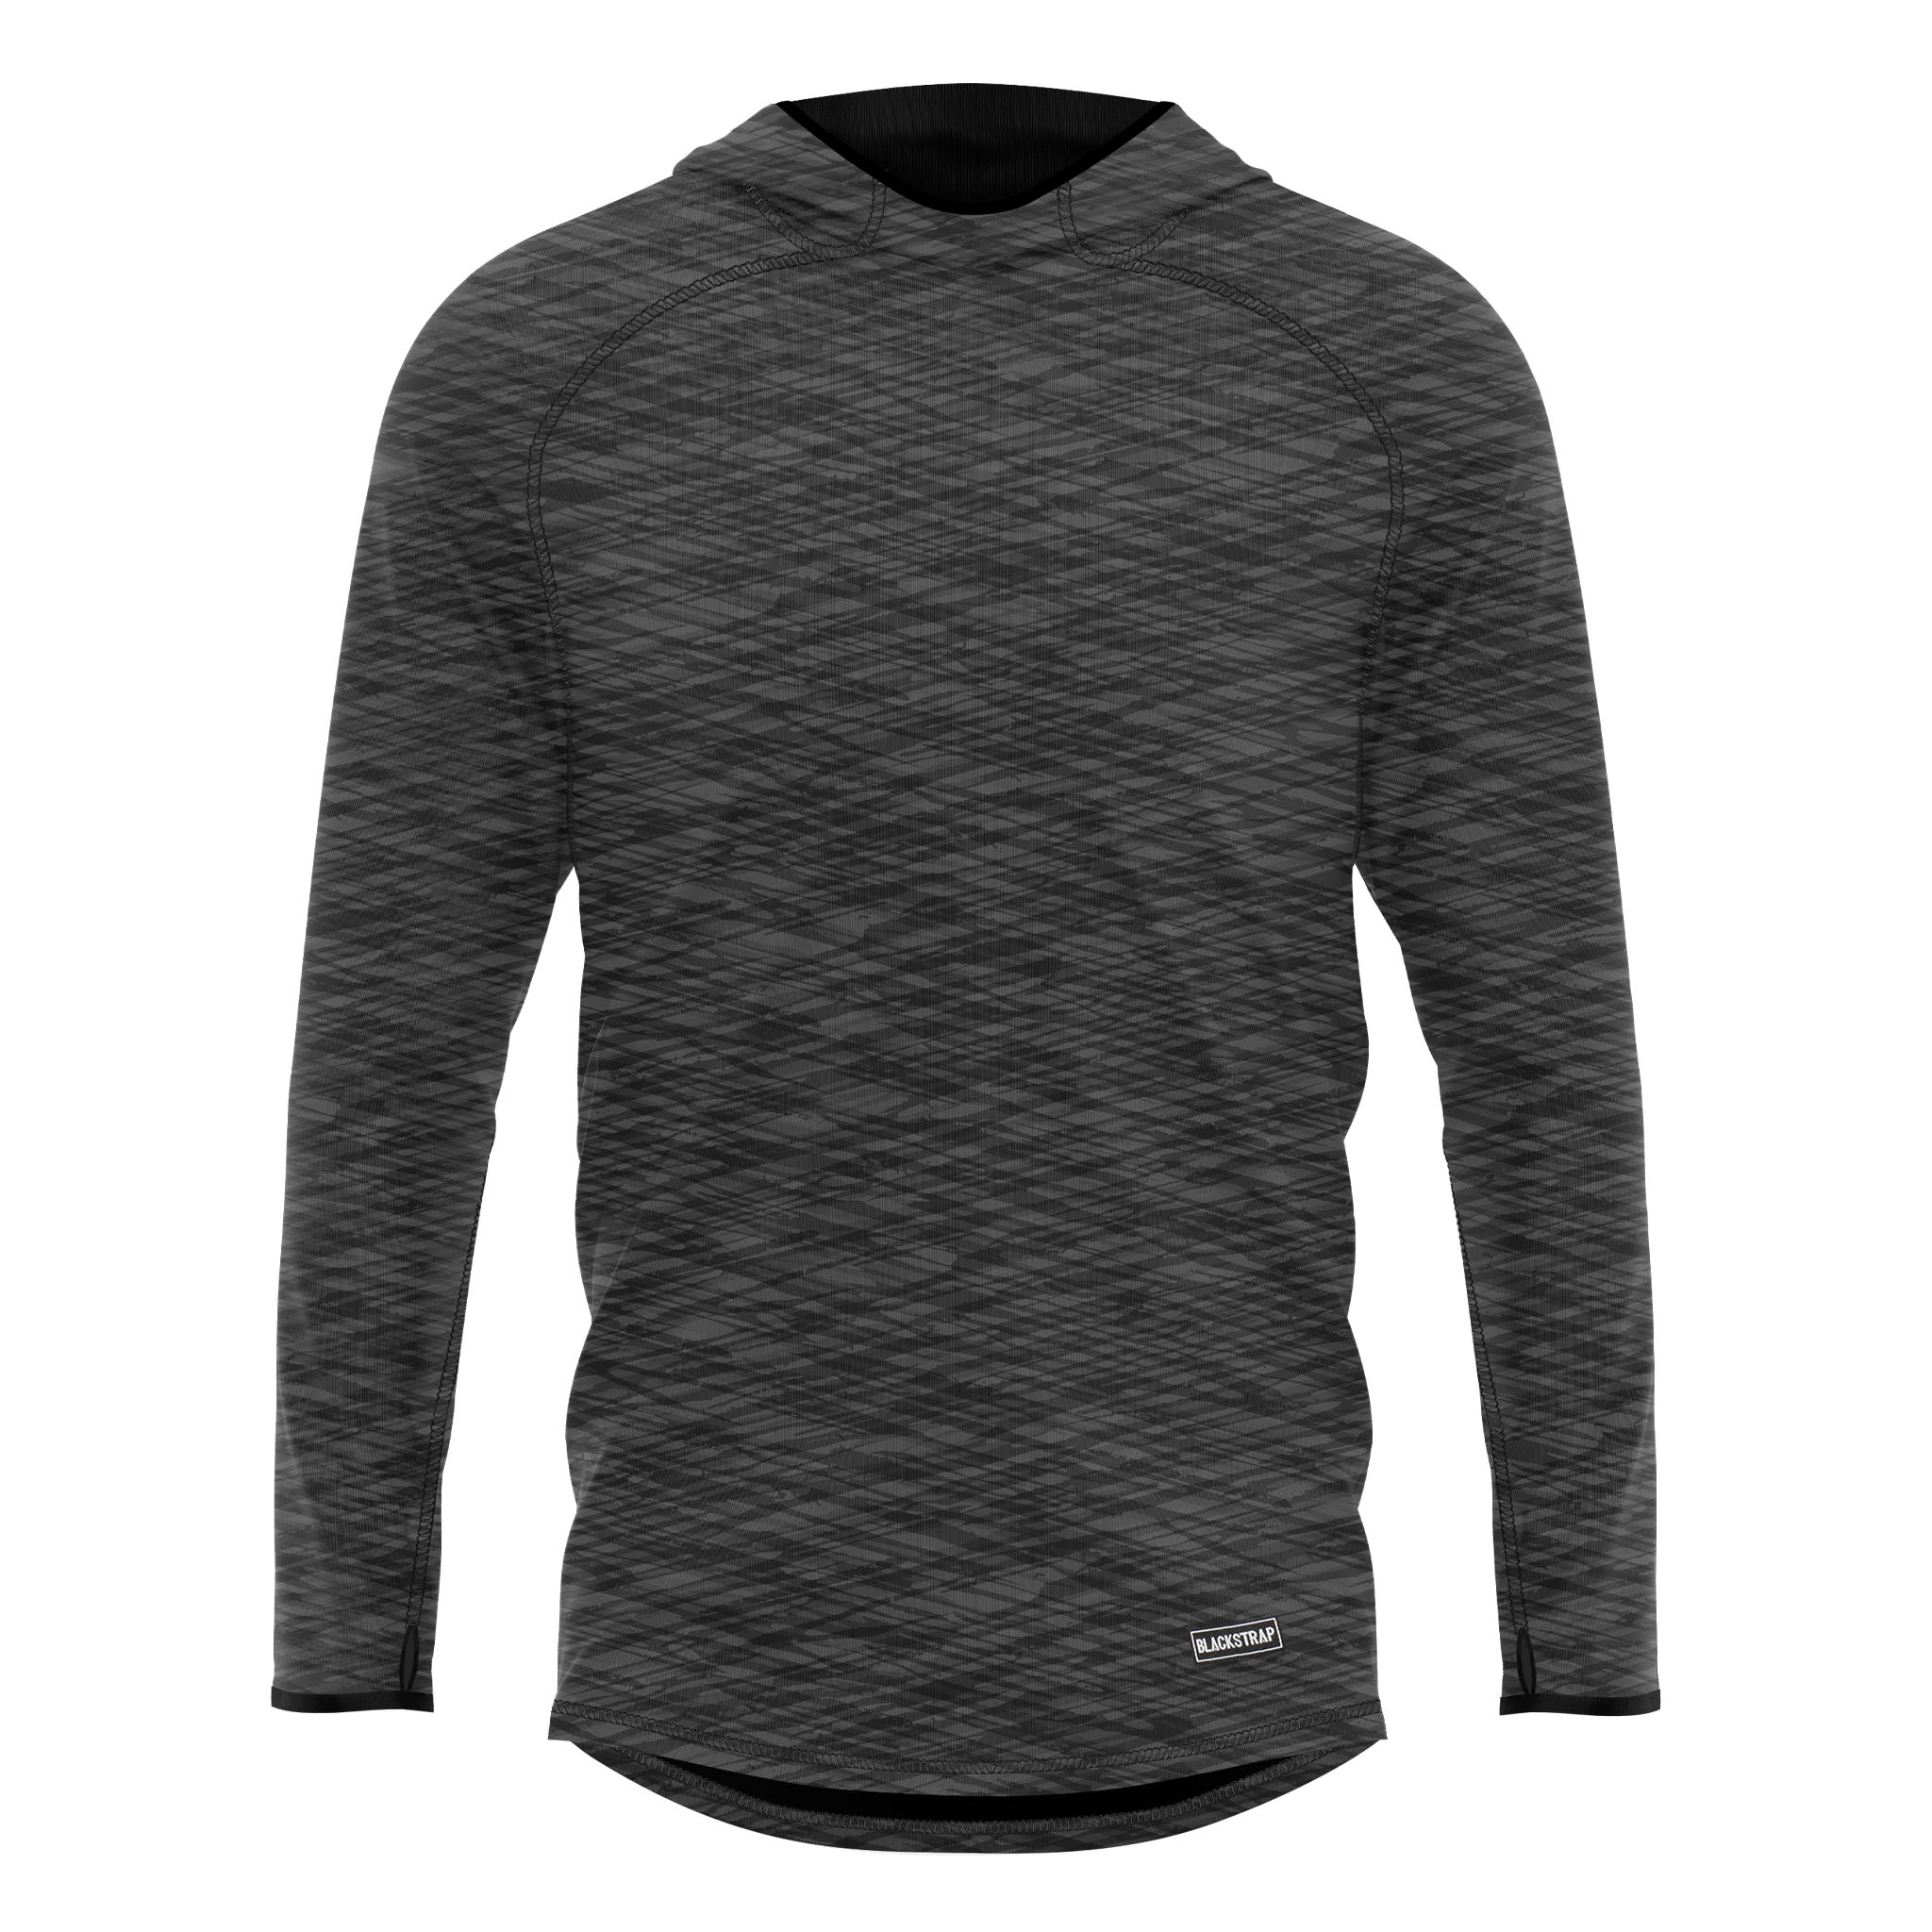 Men's Summit Base Layer Hoodie BlackStrap Hatched Charcoal S 